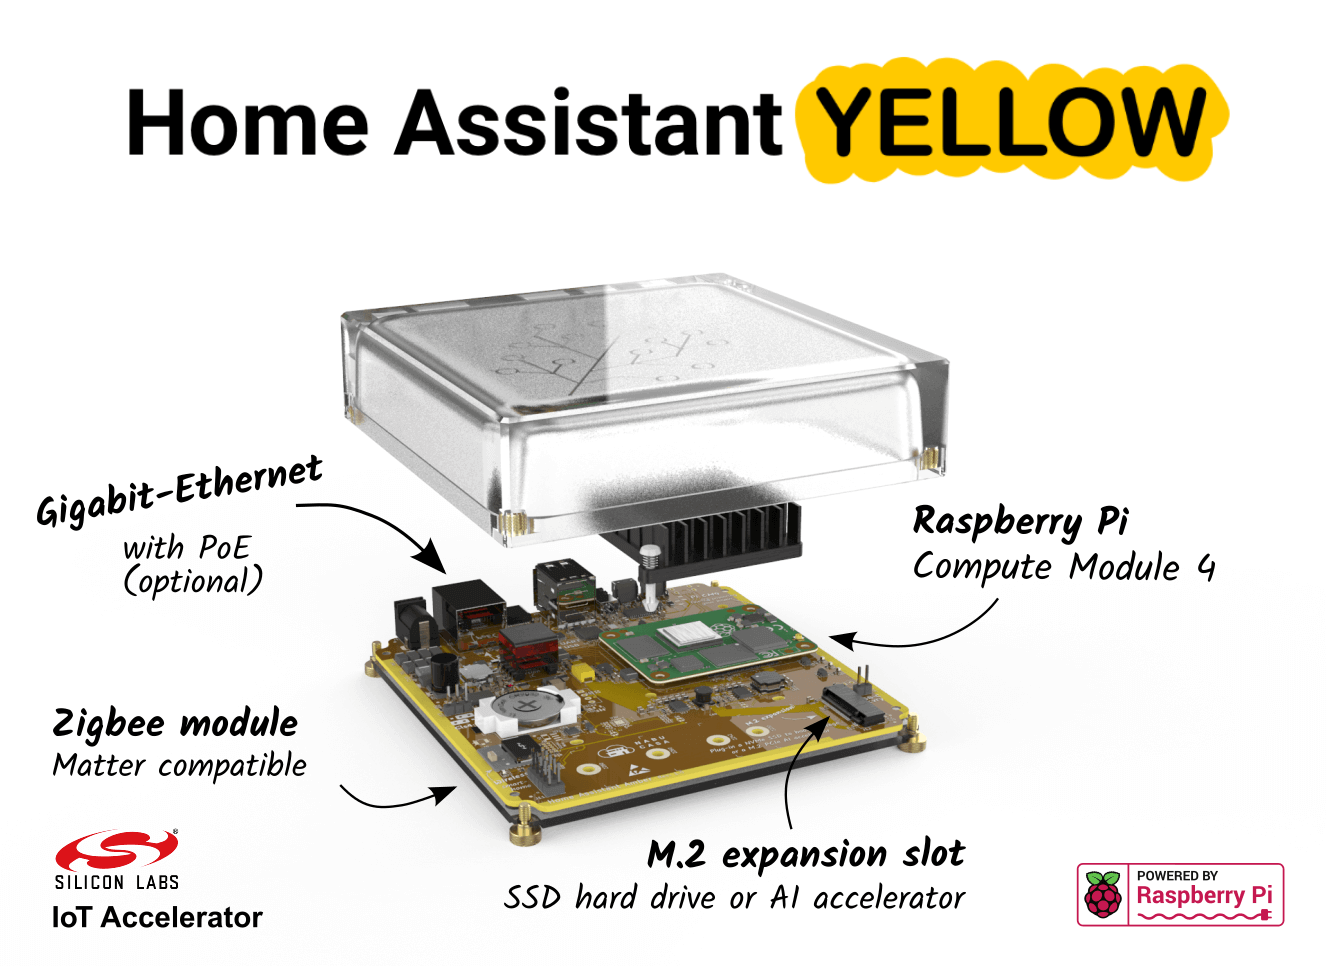 Overview of Home Assistant Yellow features.